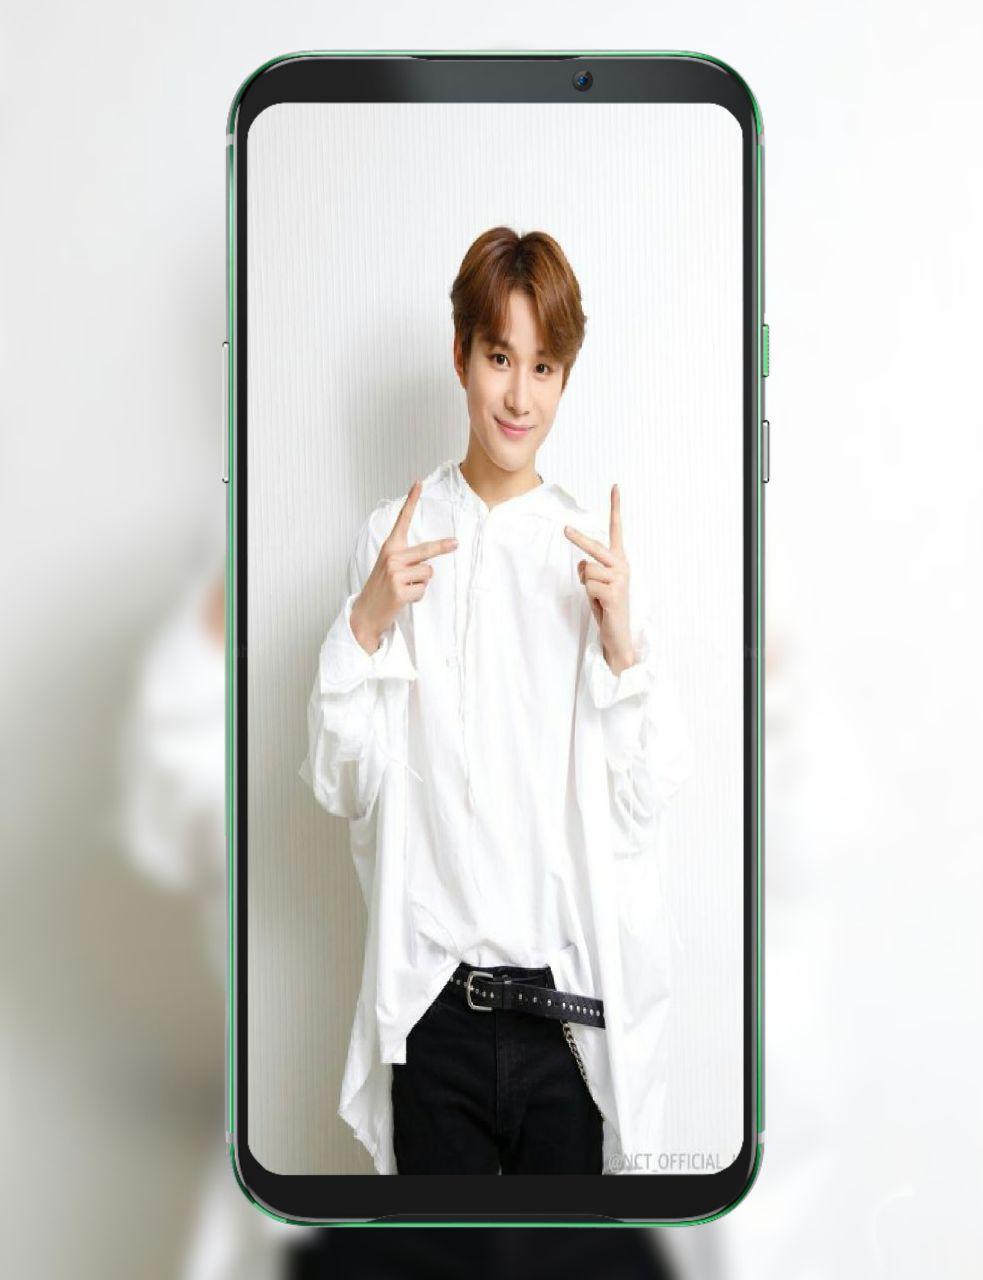 Jungwoo Nct Wallpaper Hd For Android Apk Download - jungwoo nct roblox